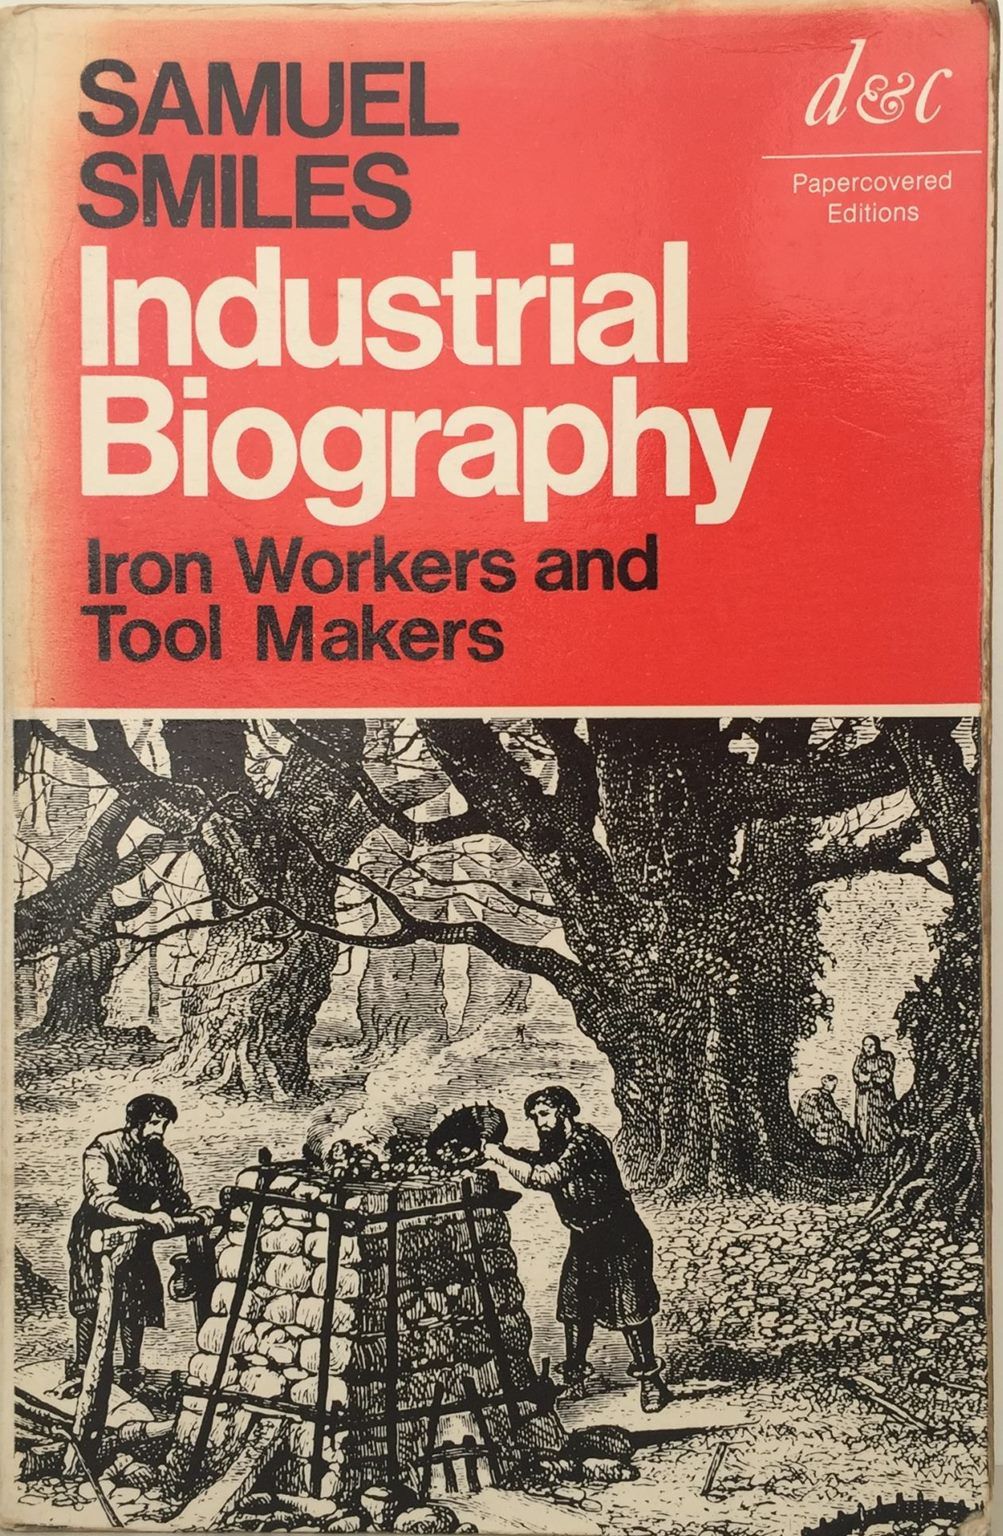 INDUSTRIAL BIOGRAPHY: Iron Workers and Tool Makers